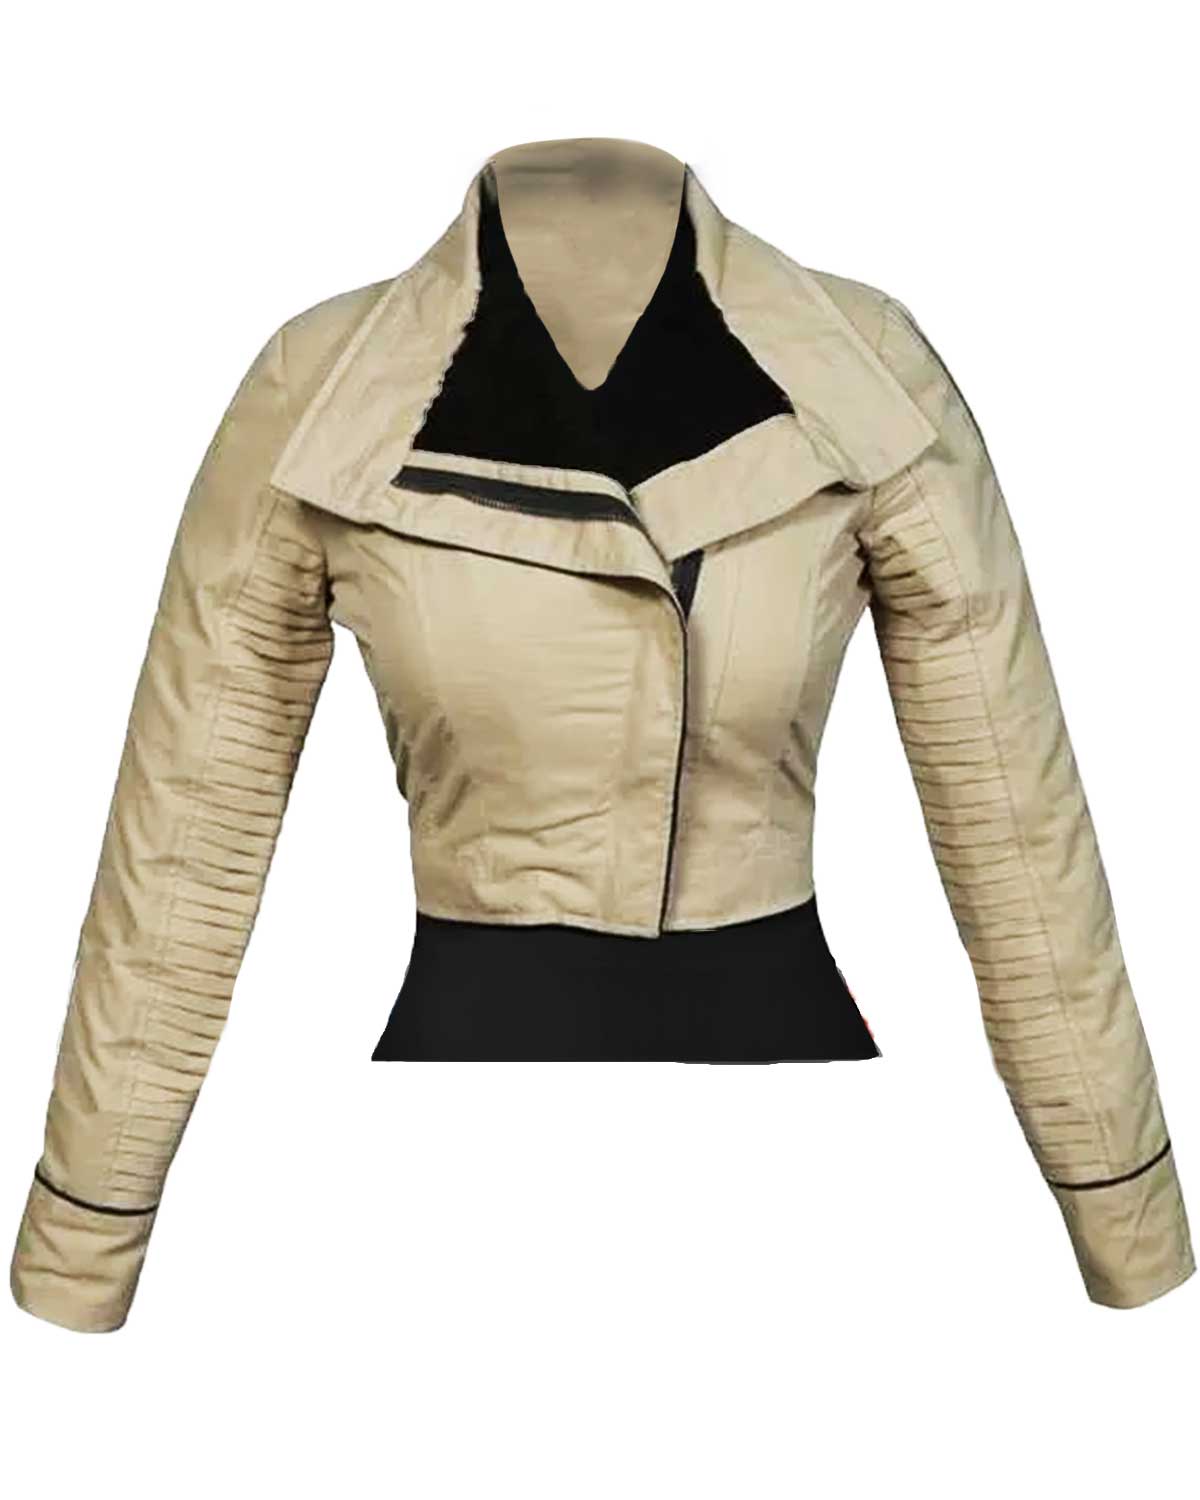 Elite Solo A Star Wars Story Qira Jacket